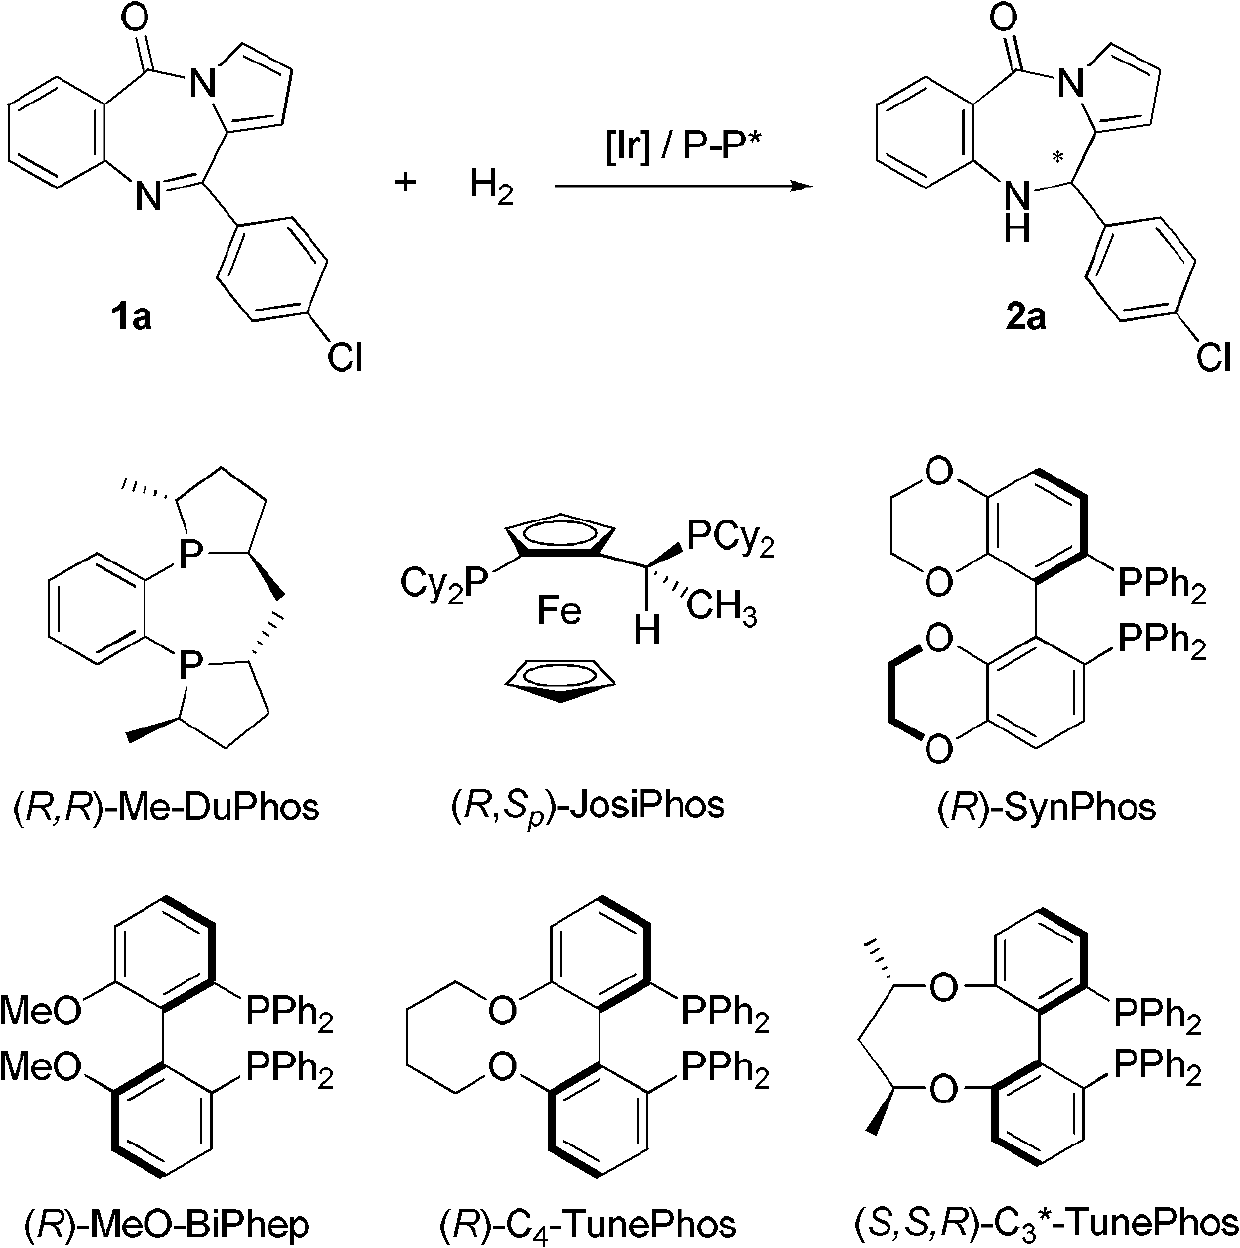 Method for synthesizing chiral dihydro-5H-pyrrolo[2,1-c][1,4]-benzodiazepino-5-one